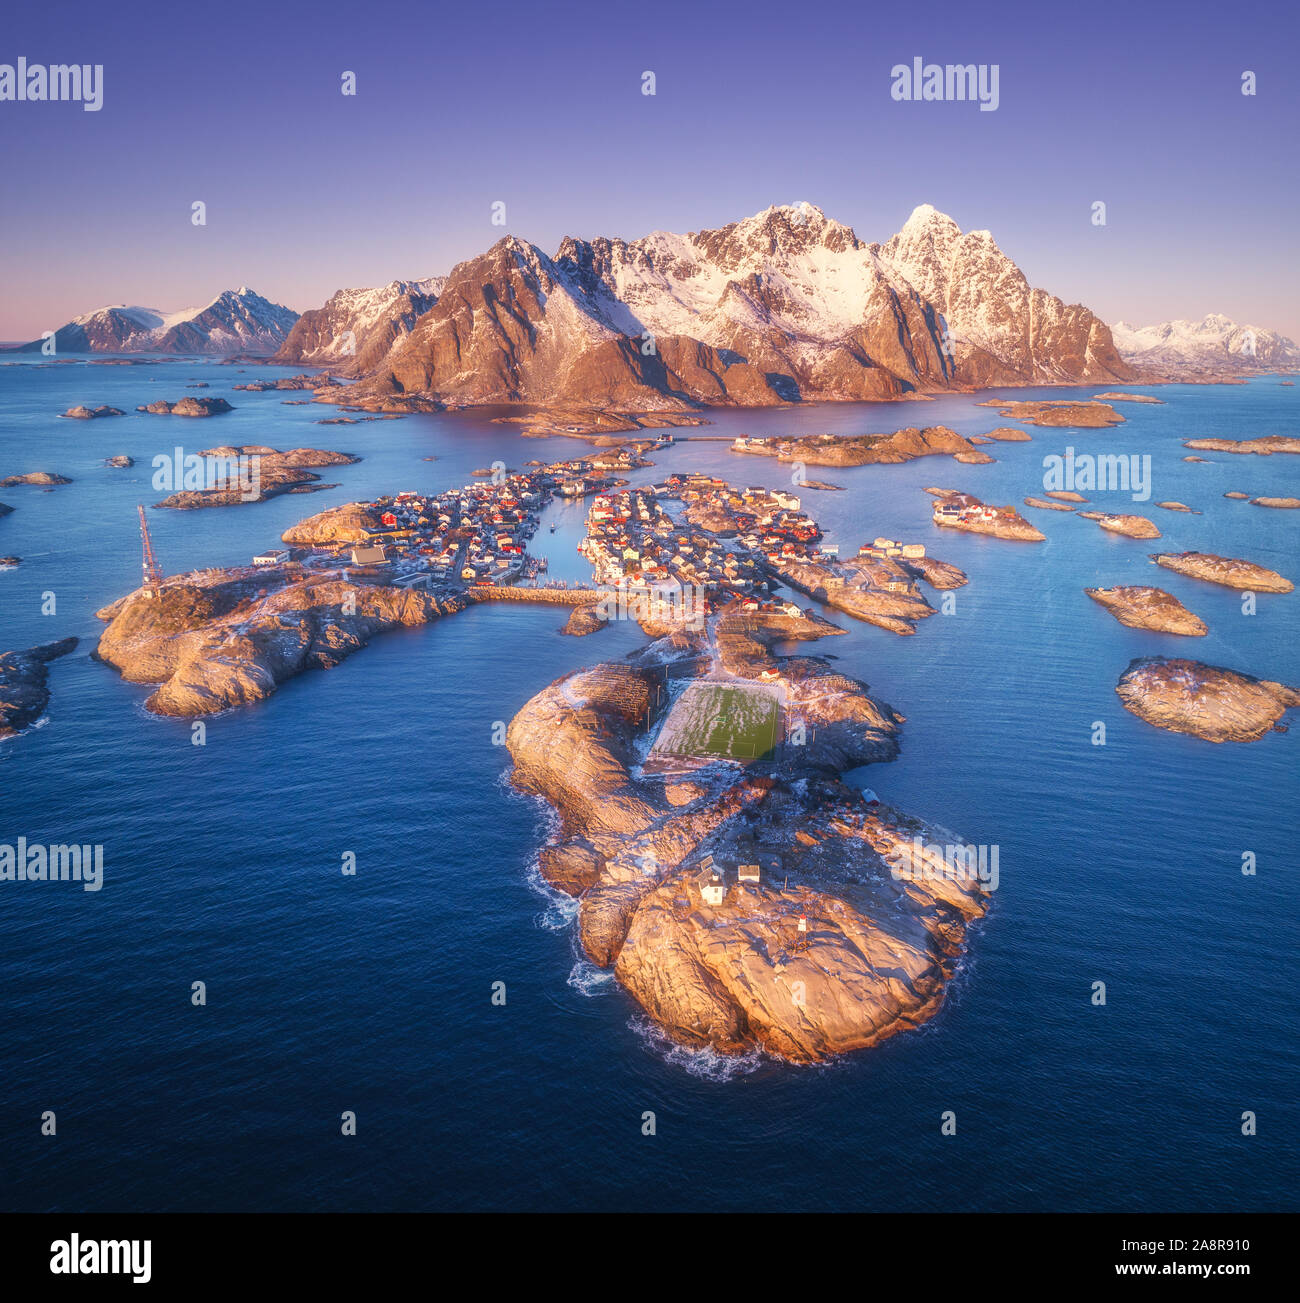 Aerial view of rocks in sea, snowy mountains, purple sky Stock Photo